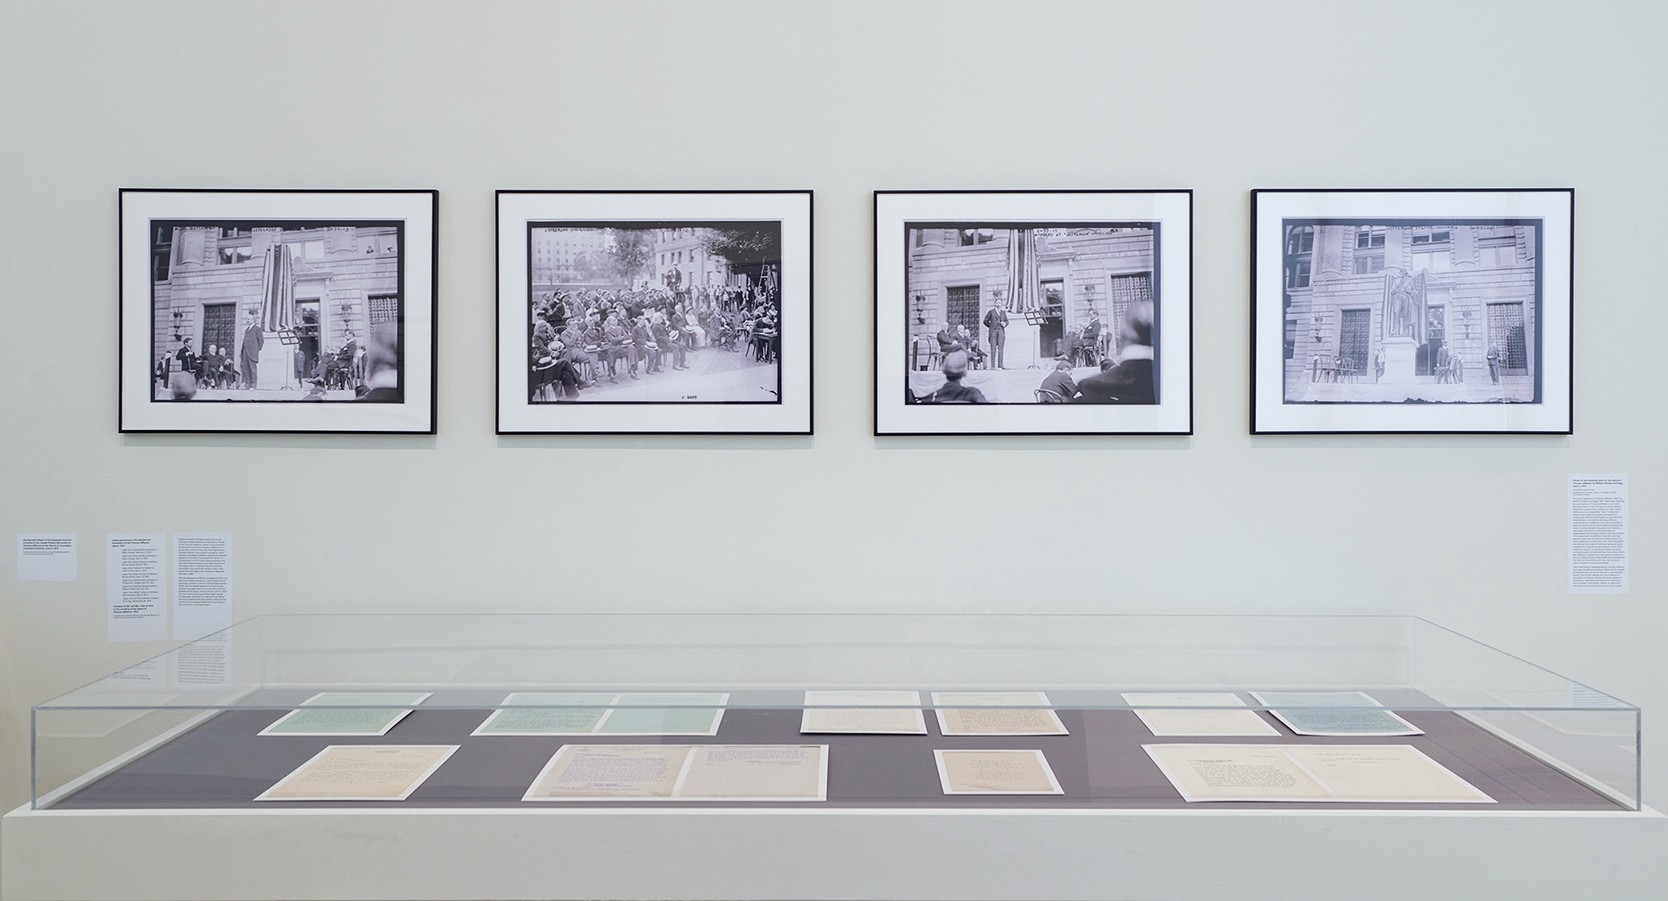 Installation view of the exhibition "The Way We Remember", on view at the Wallach Art Gallery, Columbia University September 10-November 13, 2021. Photograph by Kyle Knodell.